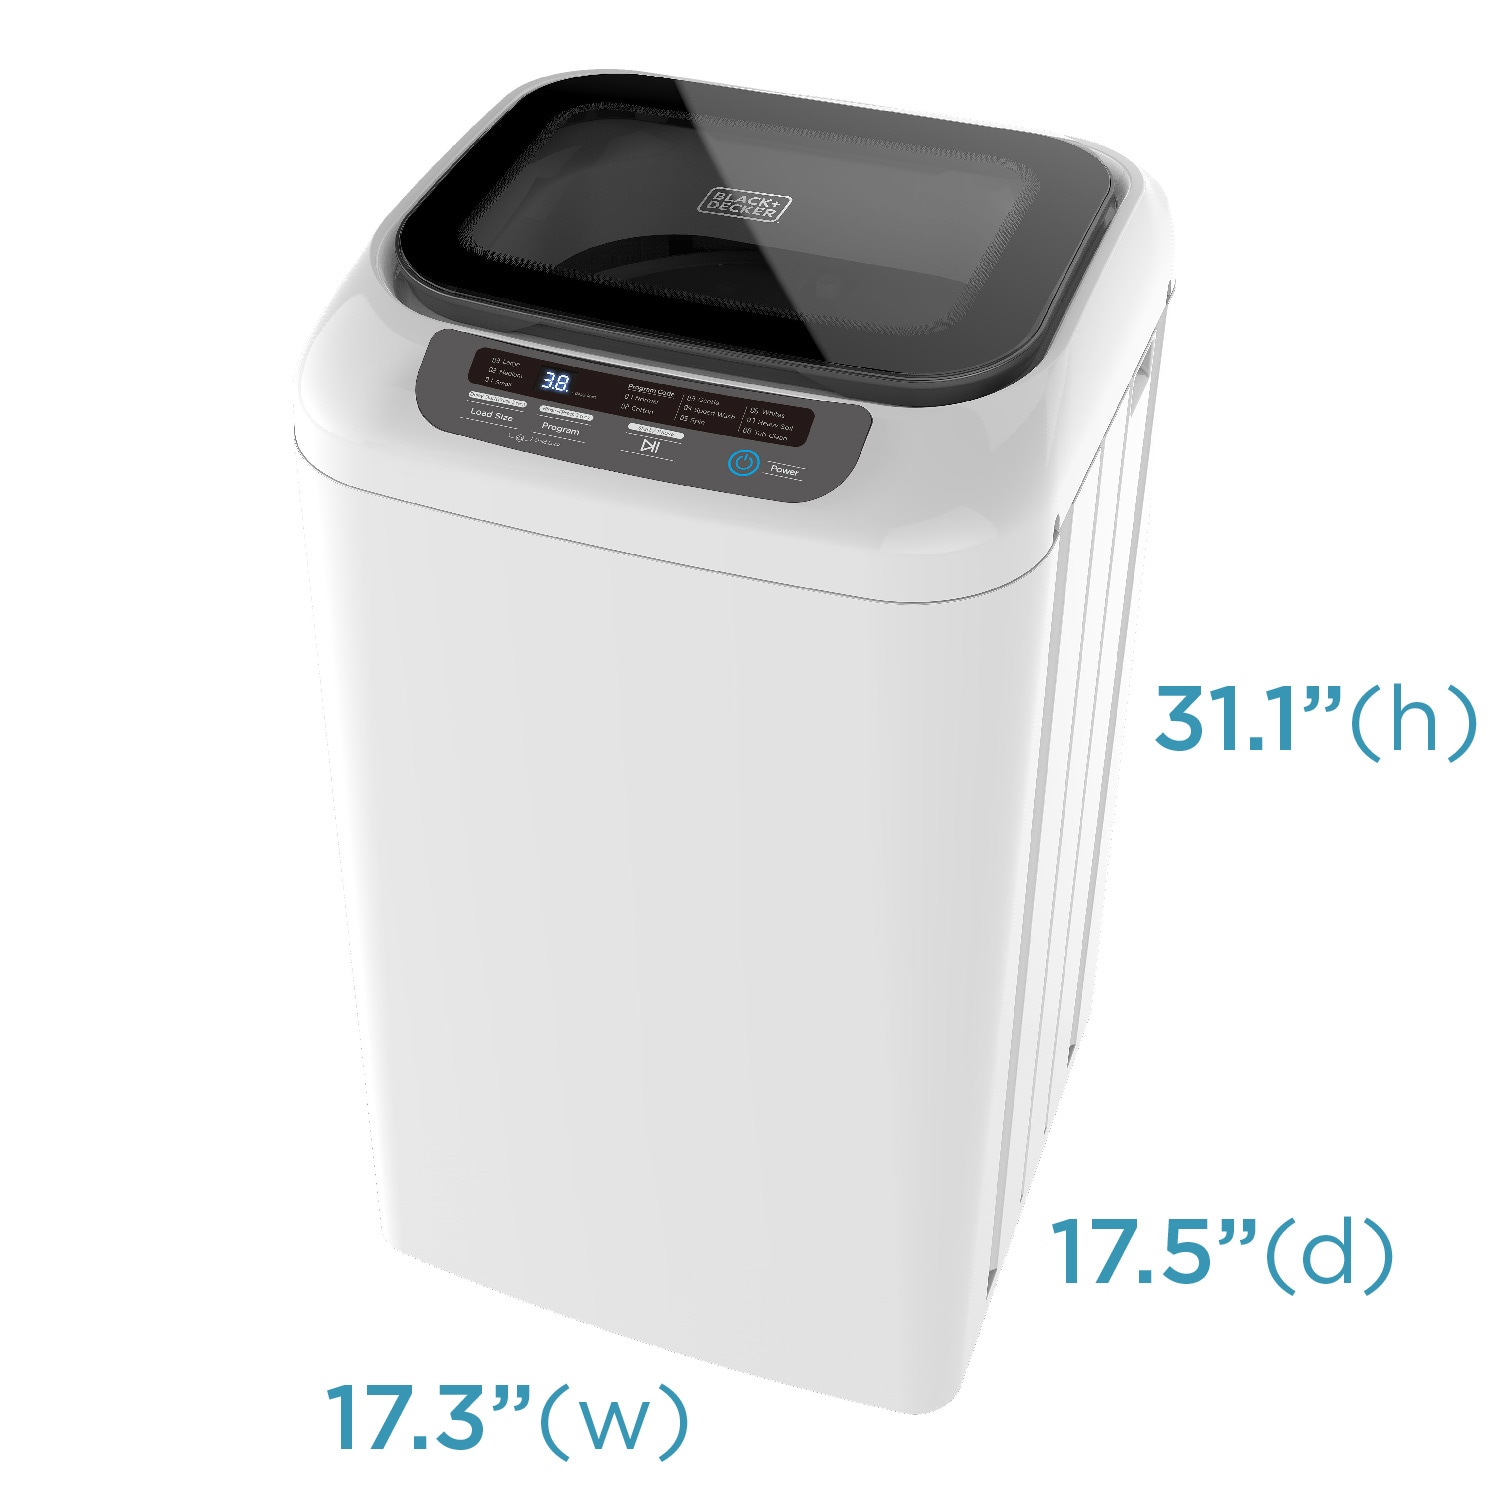  BLACK+DECKER Portable Washer and Compact Dryer Bundle ‚Äì Wash  Up To 11 lbs, 4 Drying Modes : Everything Else